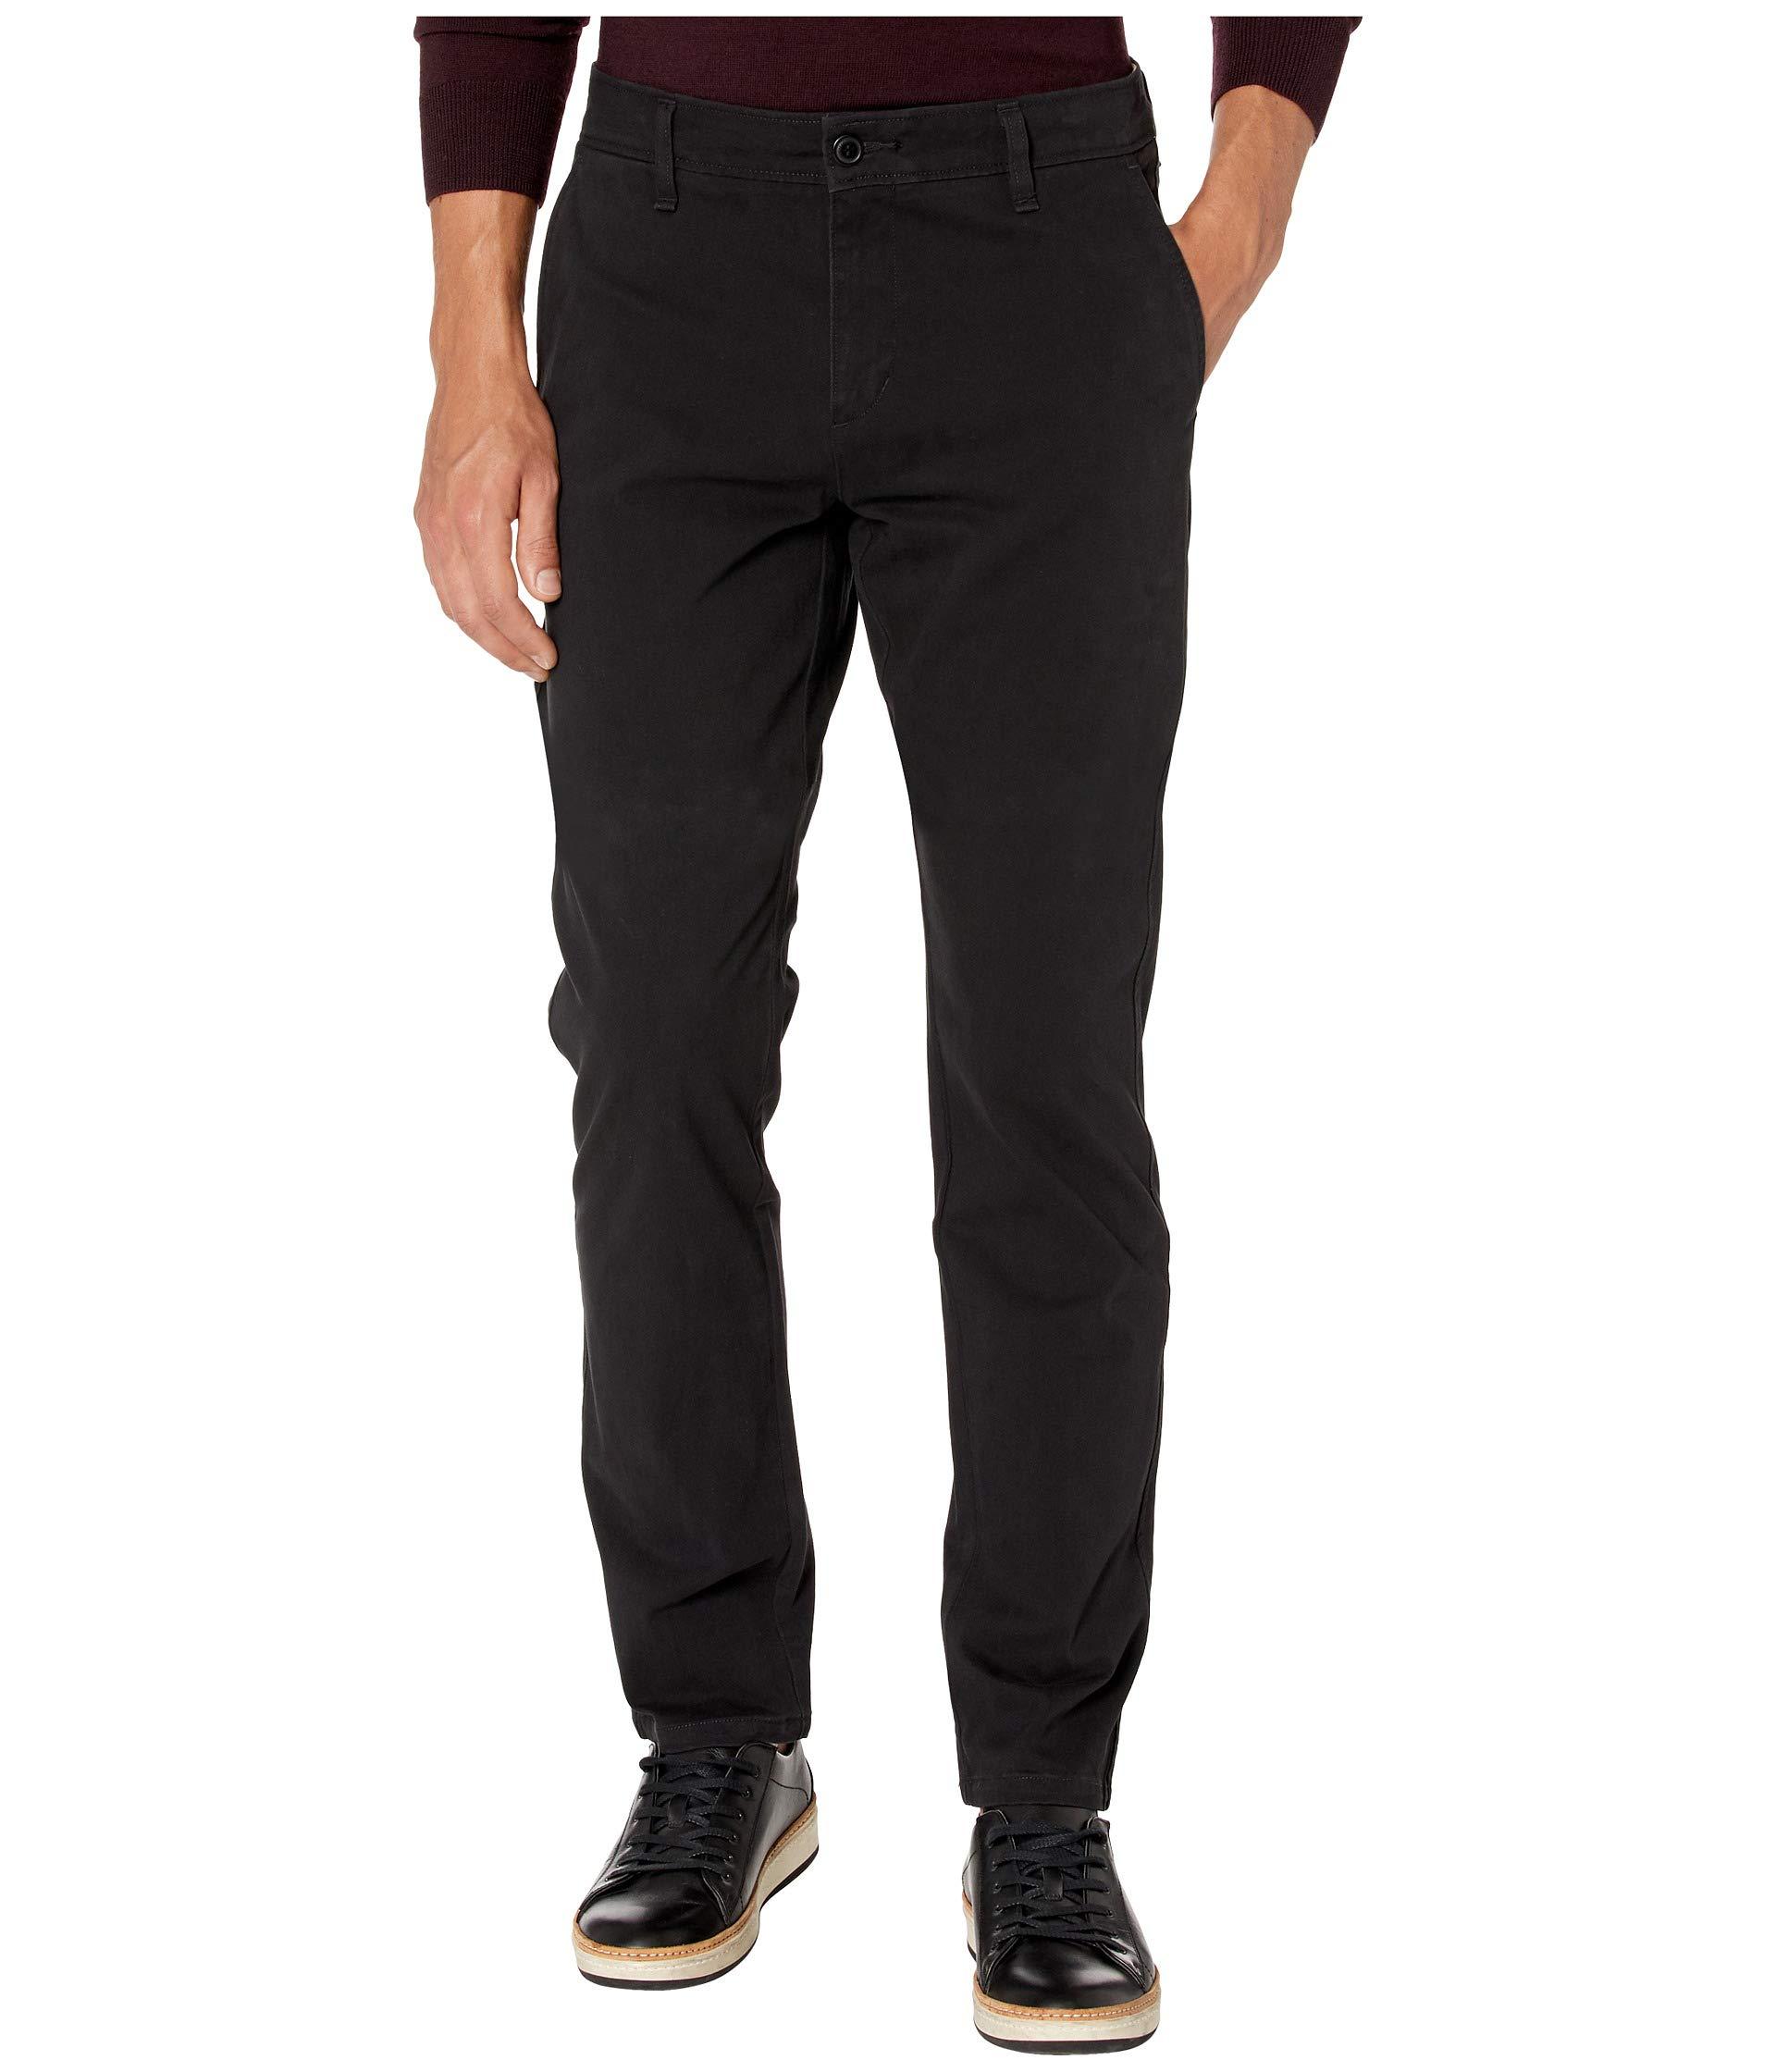 Dockers Cotton Slim Fit Ultimate Chino Pants With Smart 360 Flex in Black for Men - Lyst